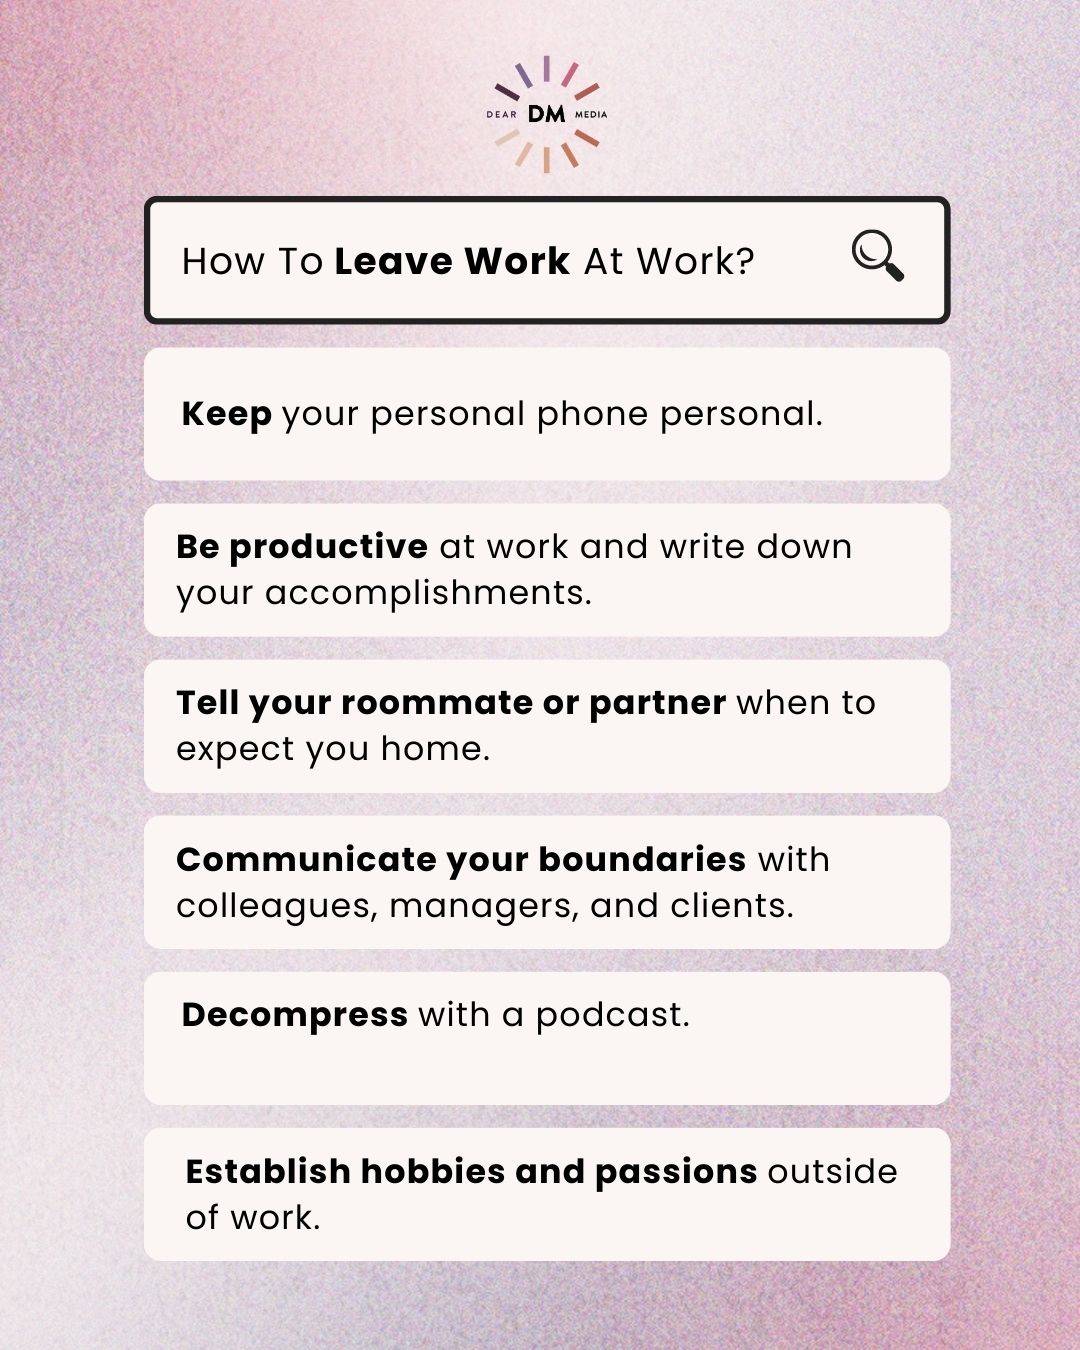 List of ways you can leave work at work 